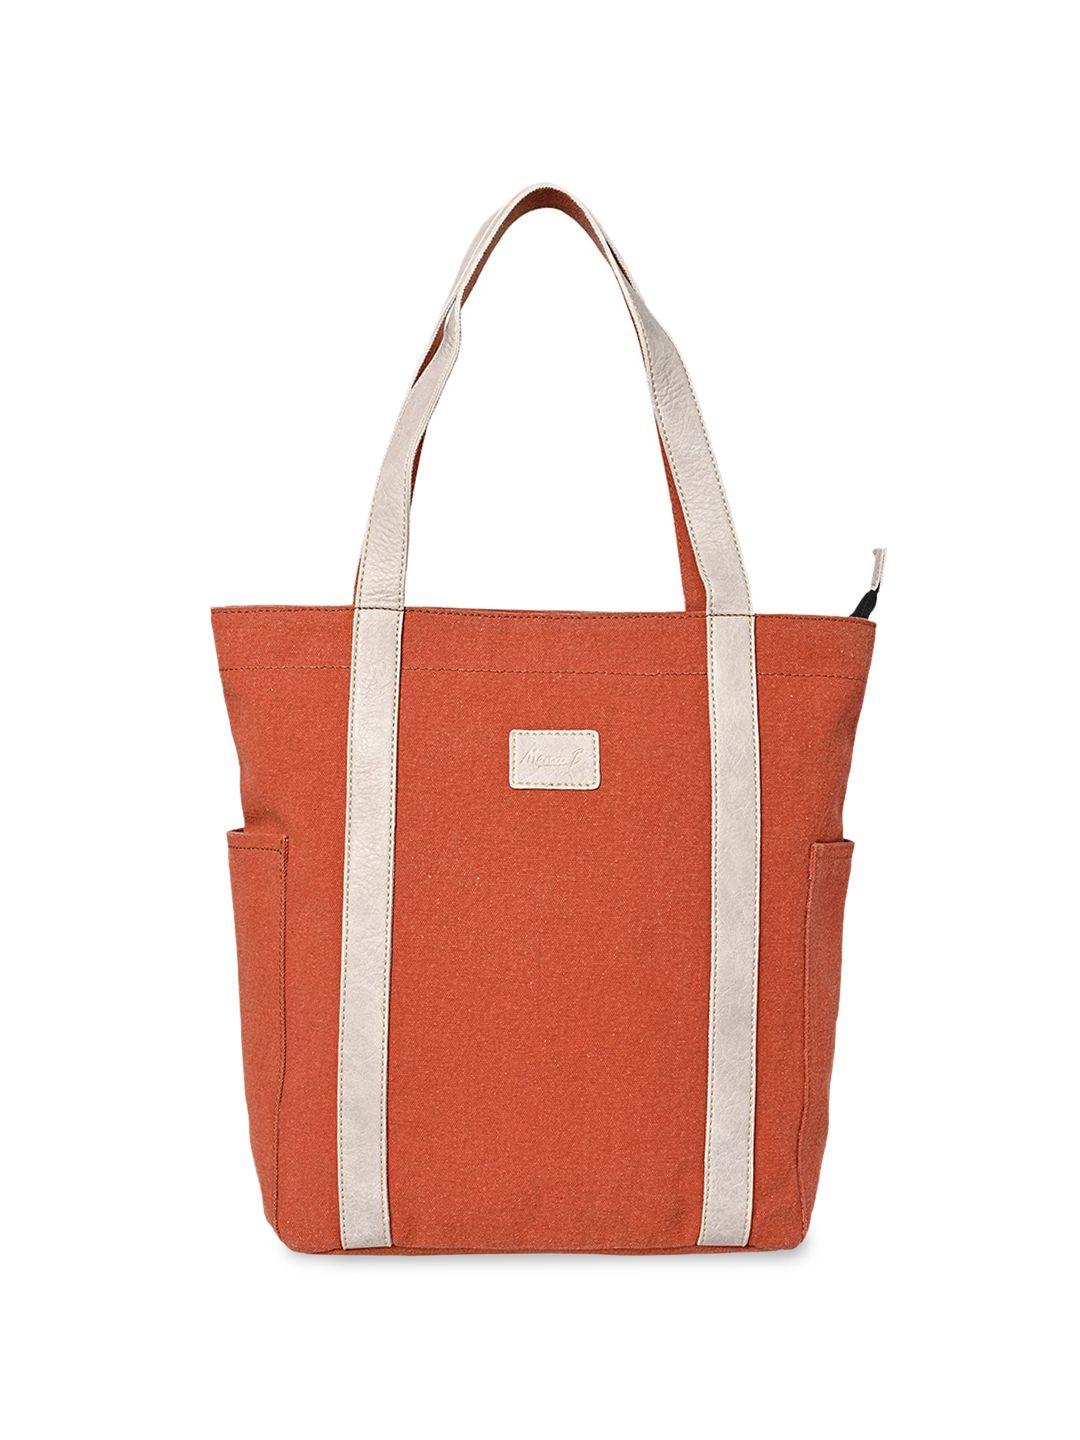 mona b orange oversized shopper tote bag with quilted